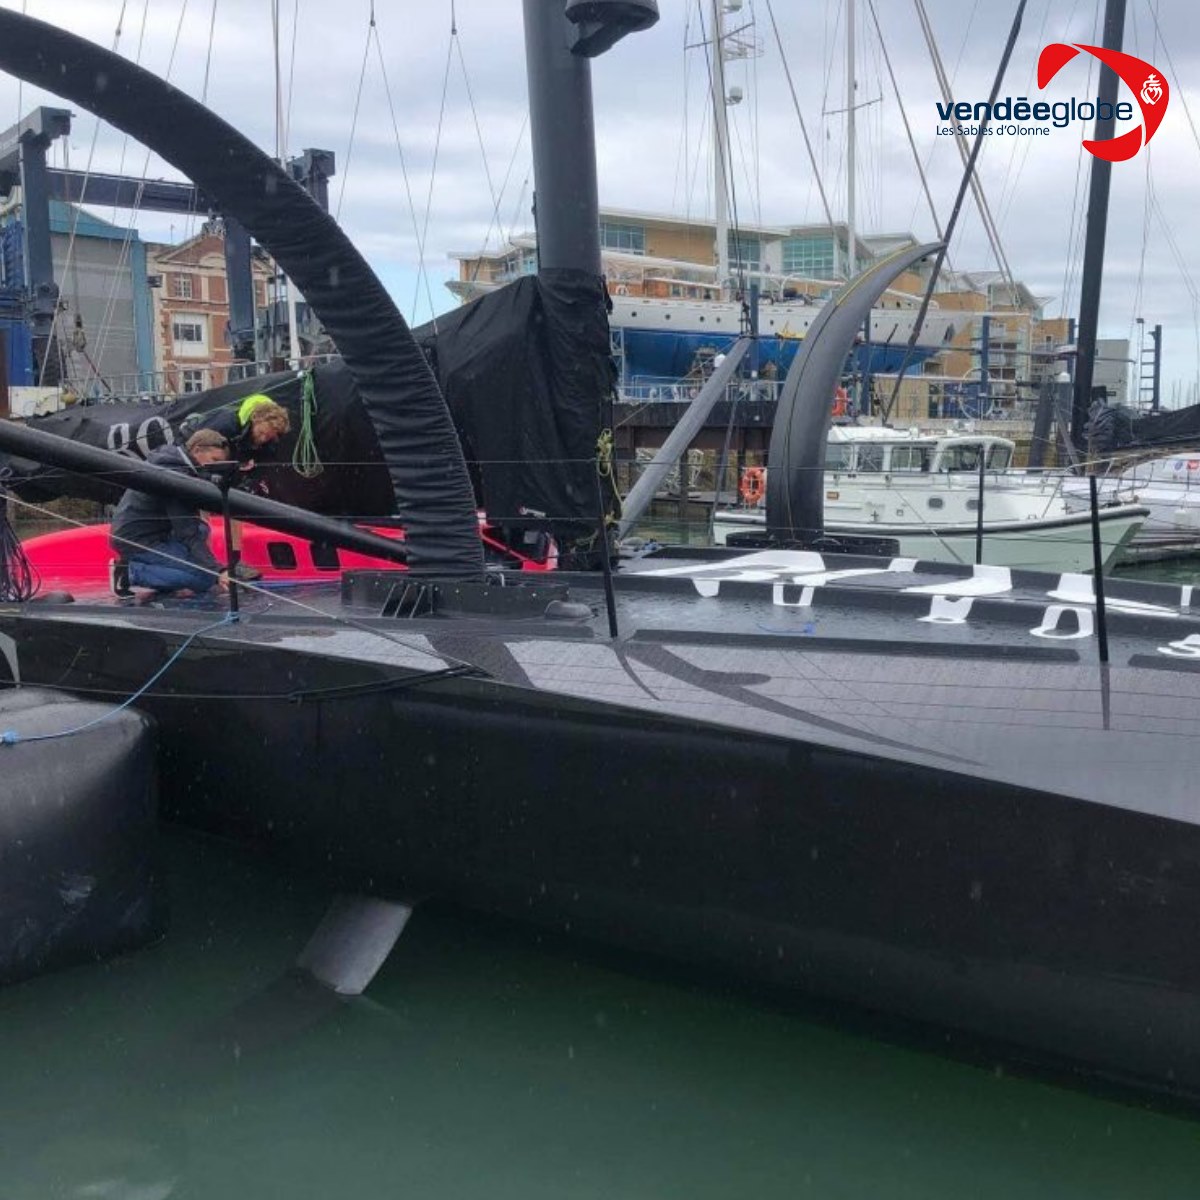 The foils of Alex Thomson Racing’s new IMOCA have been unveiled… and they are huge! ðŸ˜²